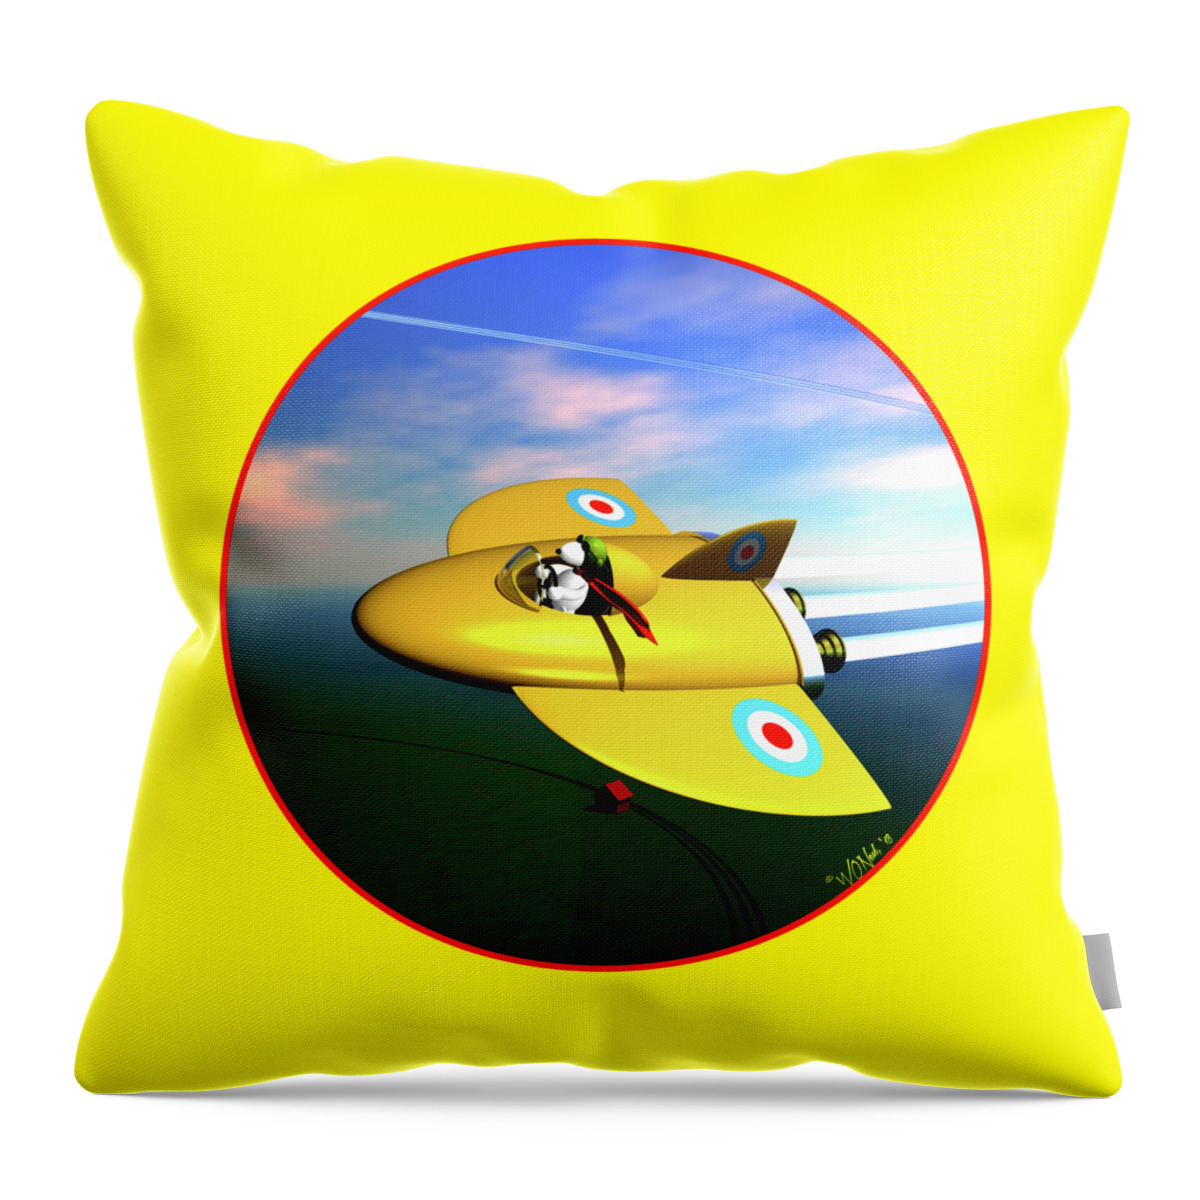 Cartoons Throw Pillow featuring the digital art Snoopy The Flying Ace by Walter Neal